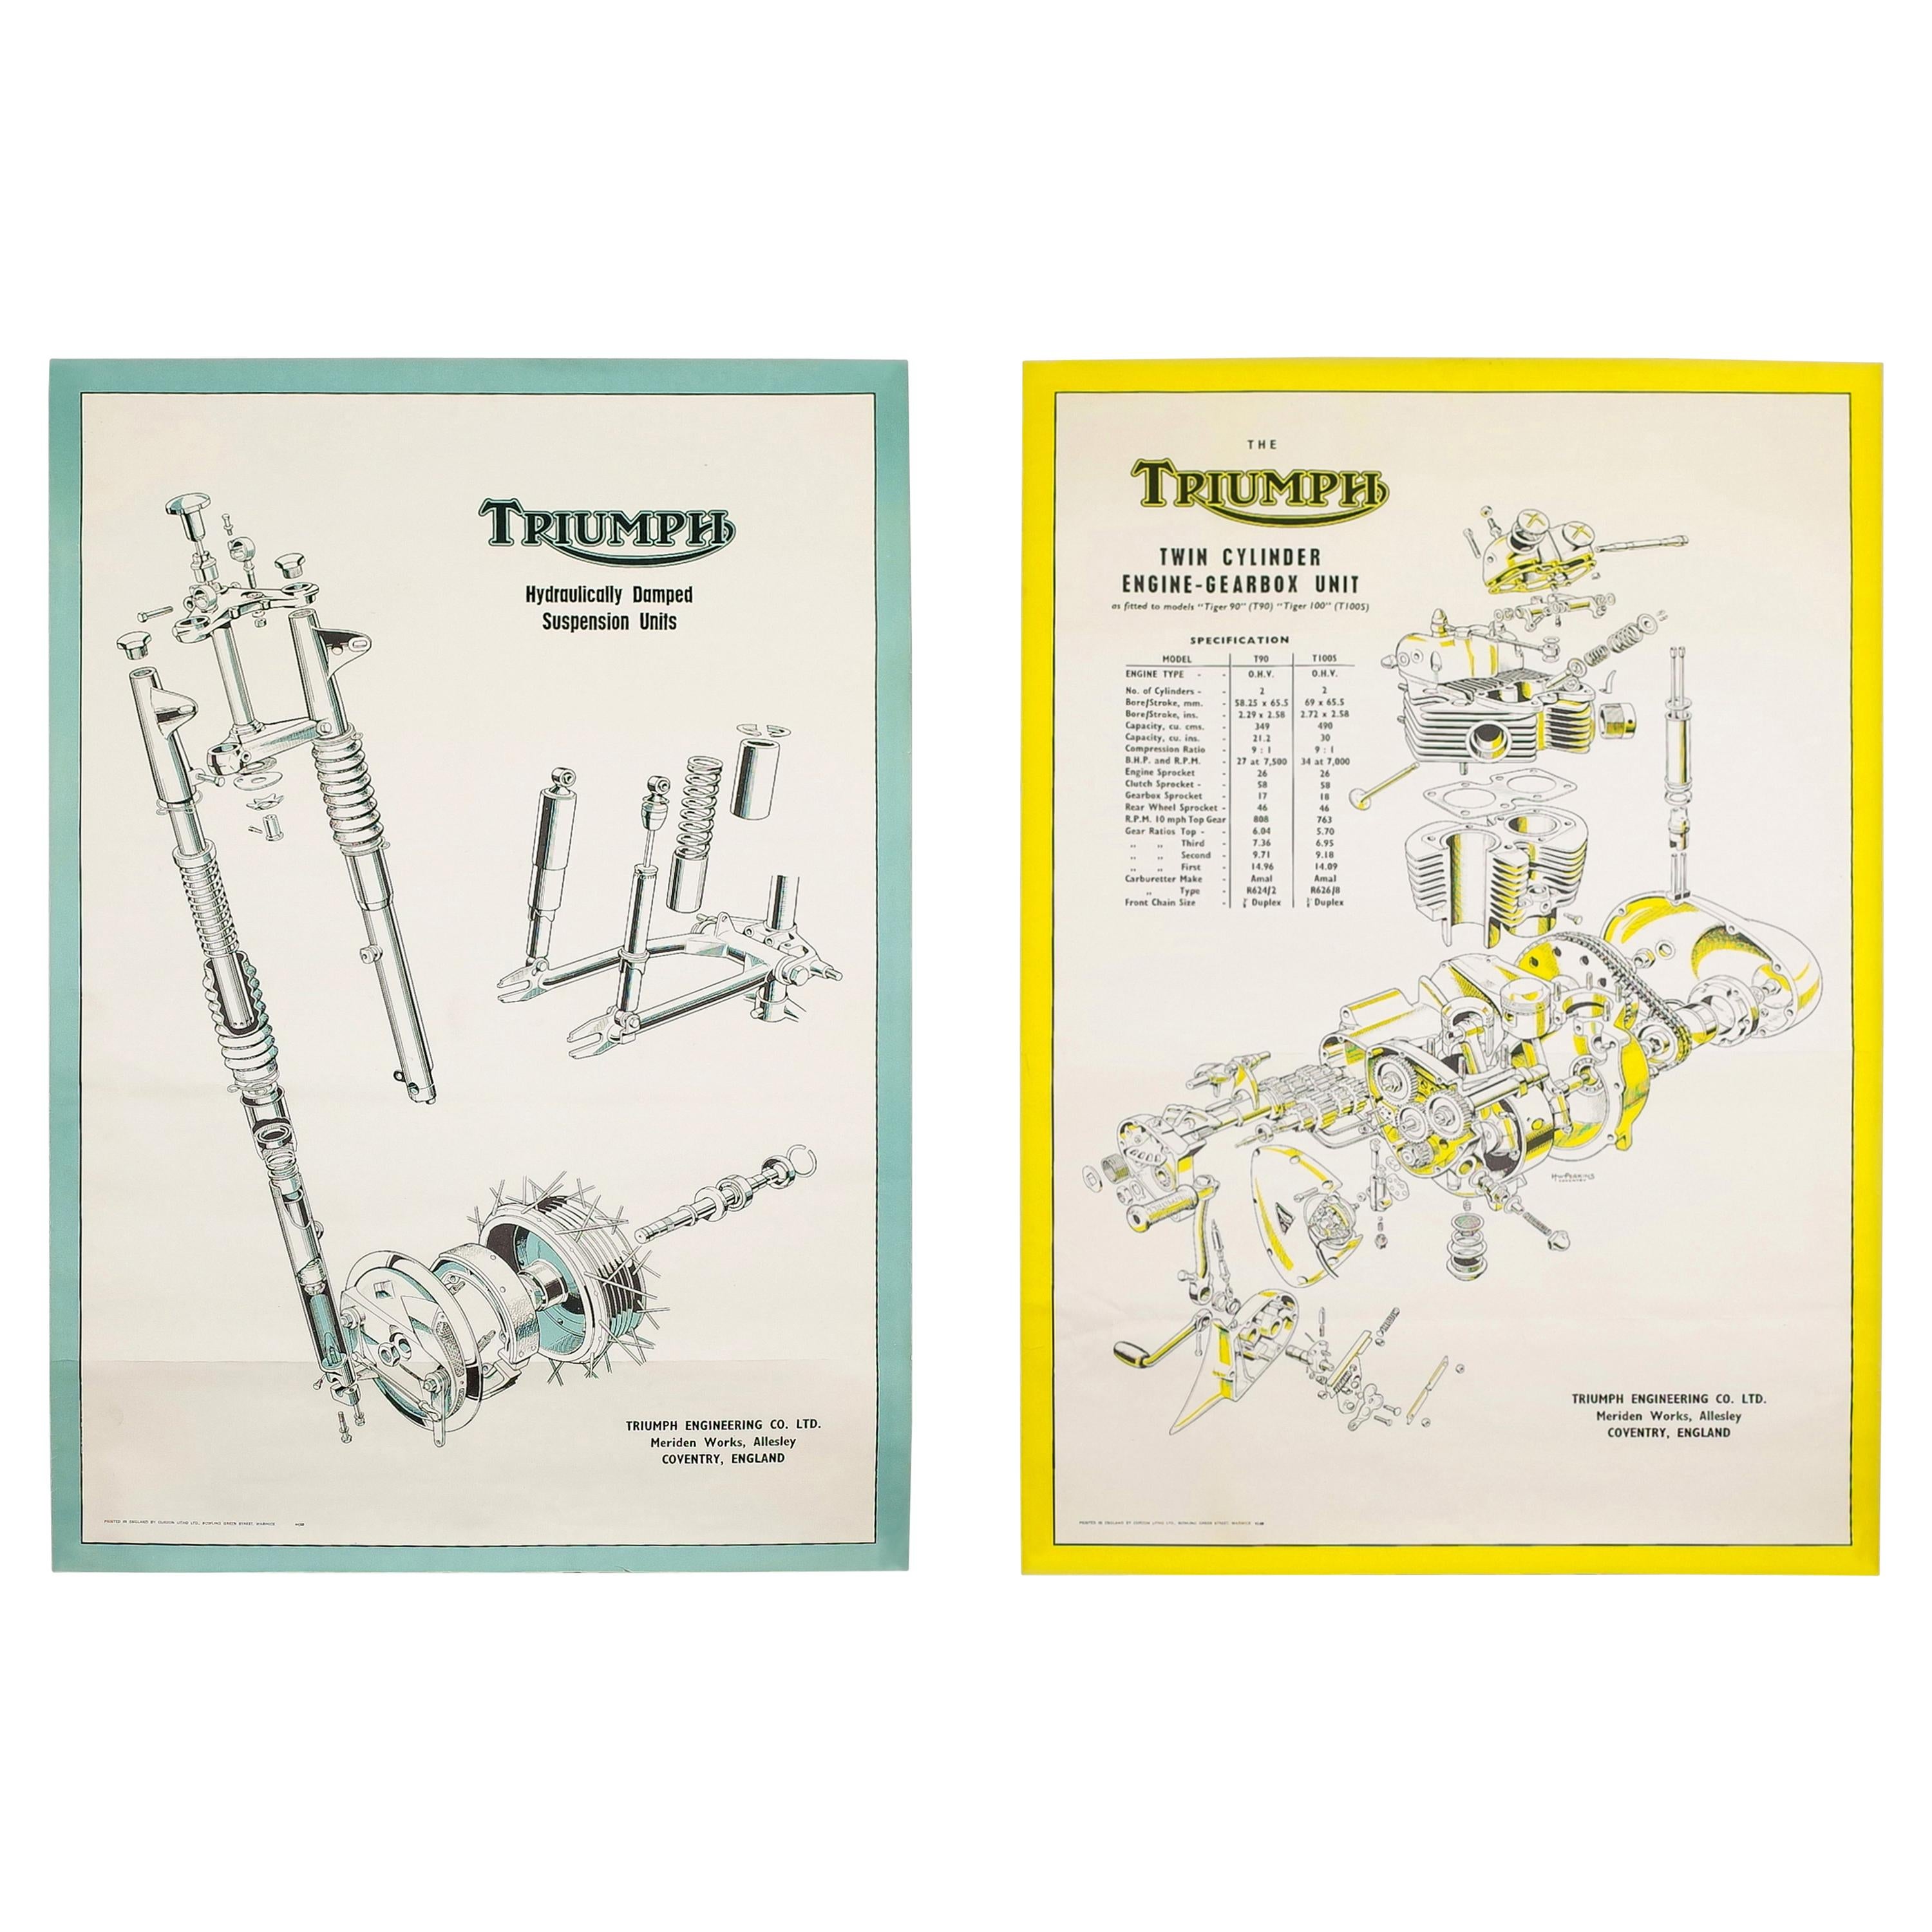 Pair of Triumph Motorcycle Original Technical Posters, England, 1950s